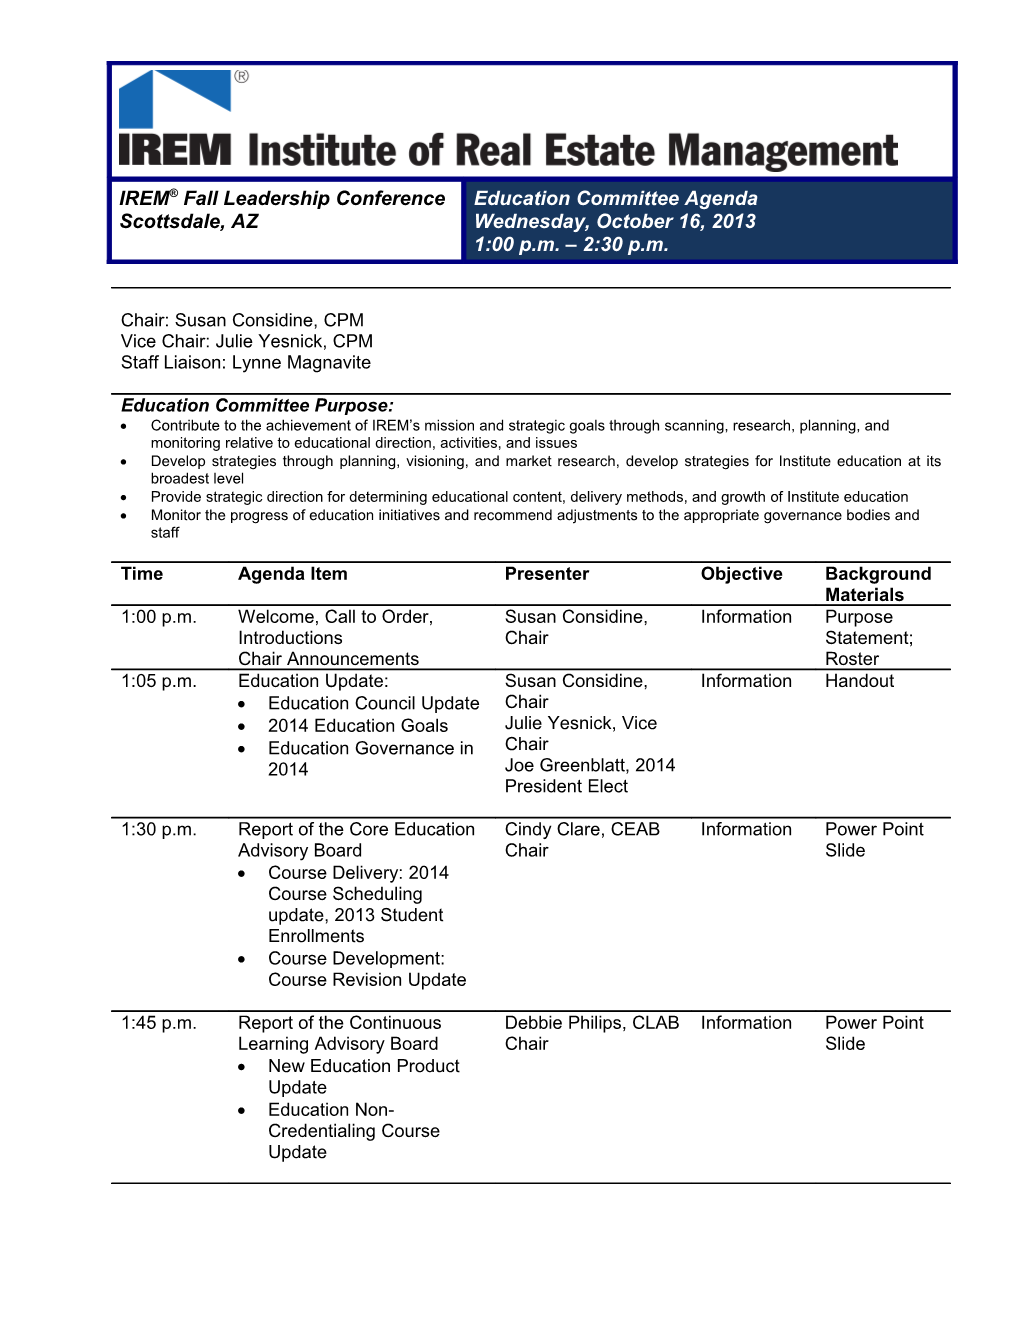 Education Committee Agenda - October 2013 IREM Fall Leadership Conference